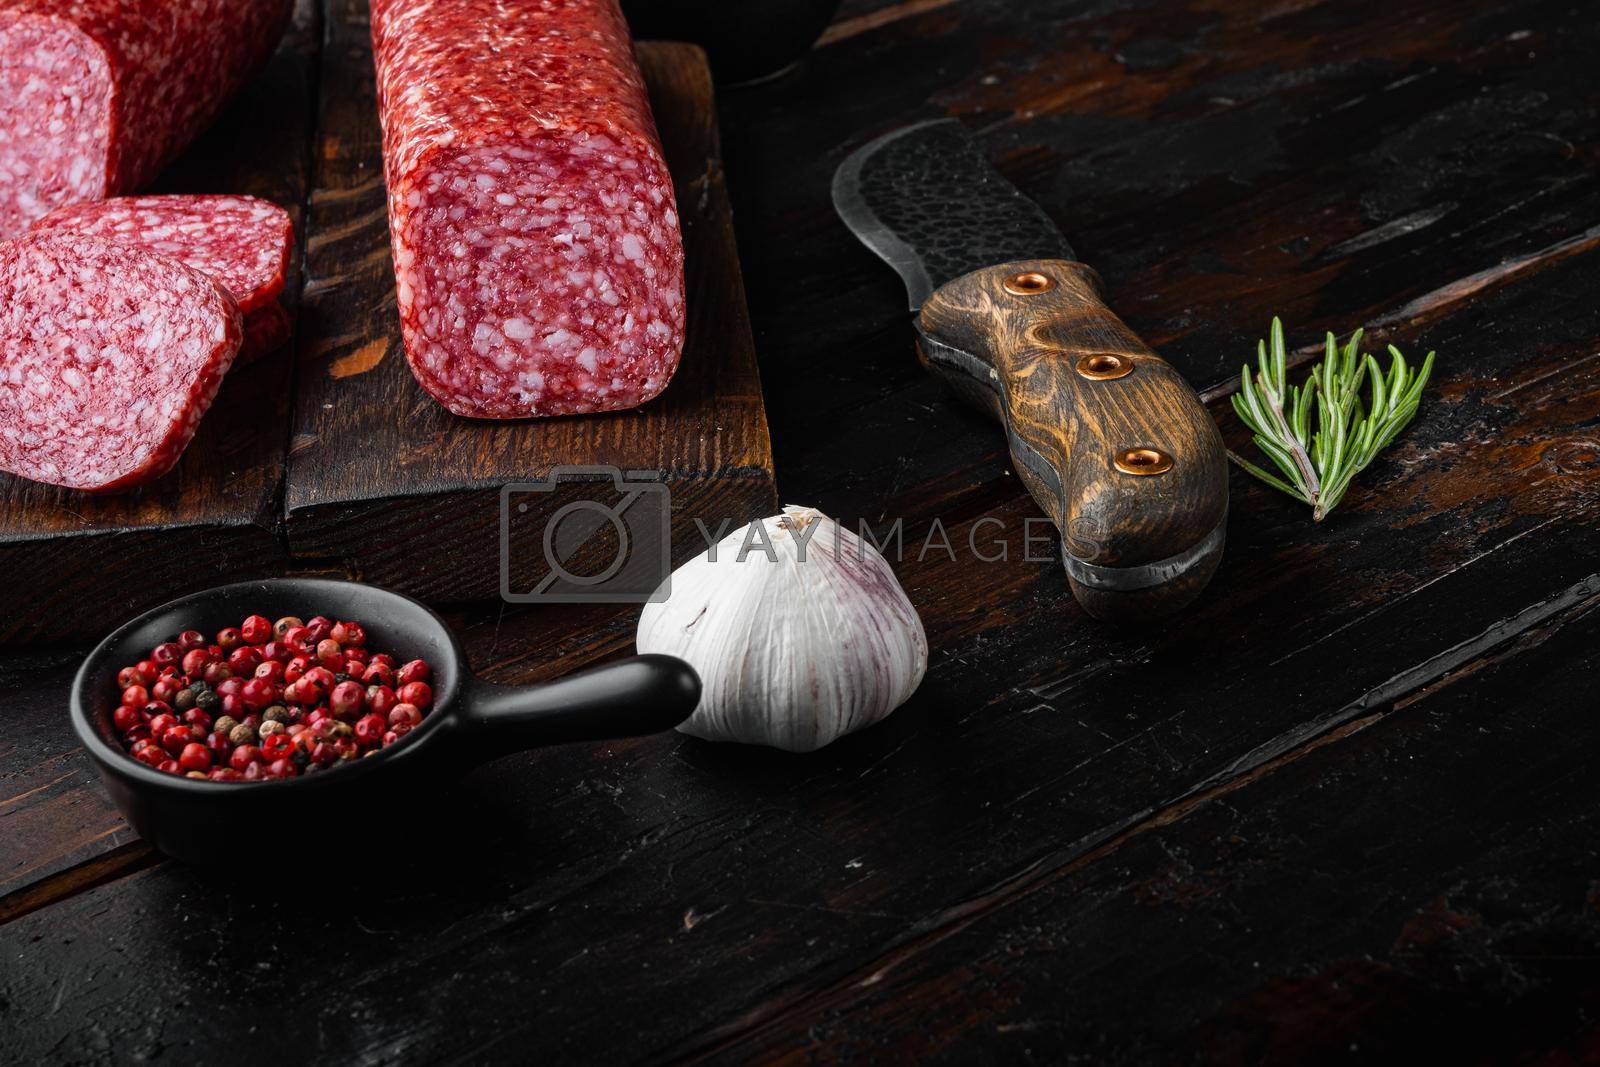 Royalty free image of Salami with ingredients, on old dark wooden table background, with copy space for text by Ilianesolenyi